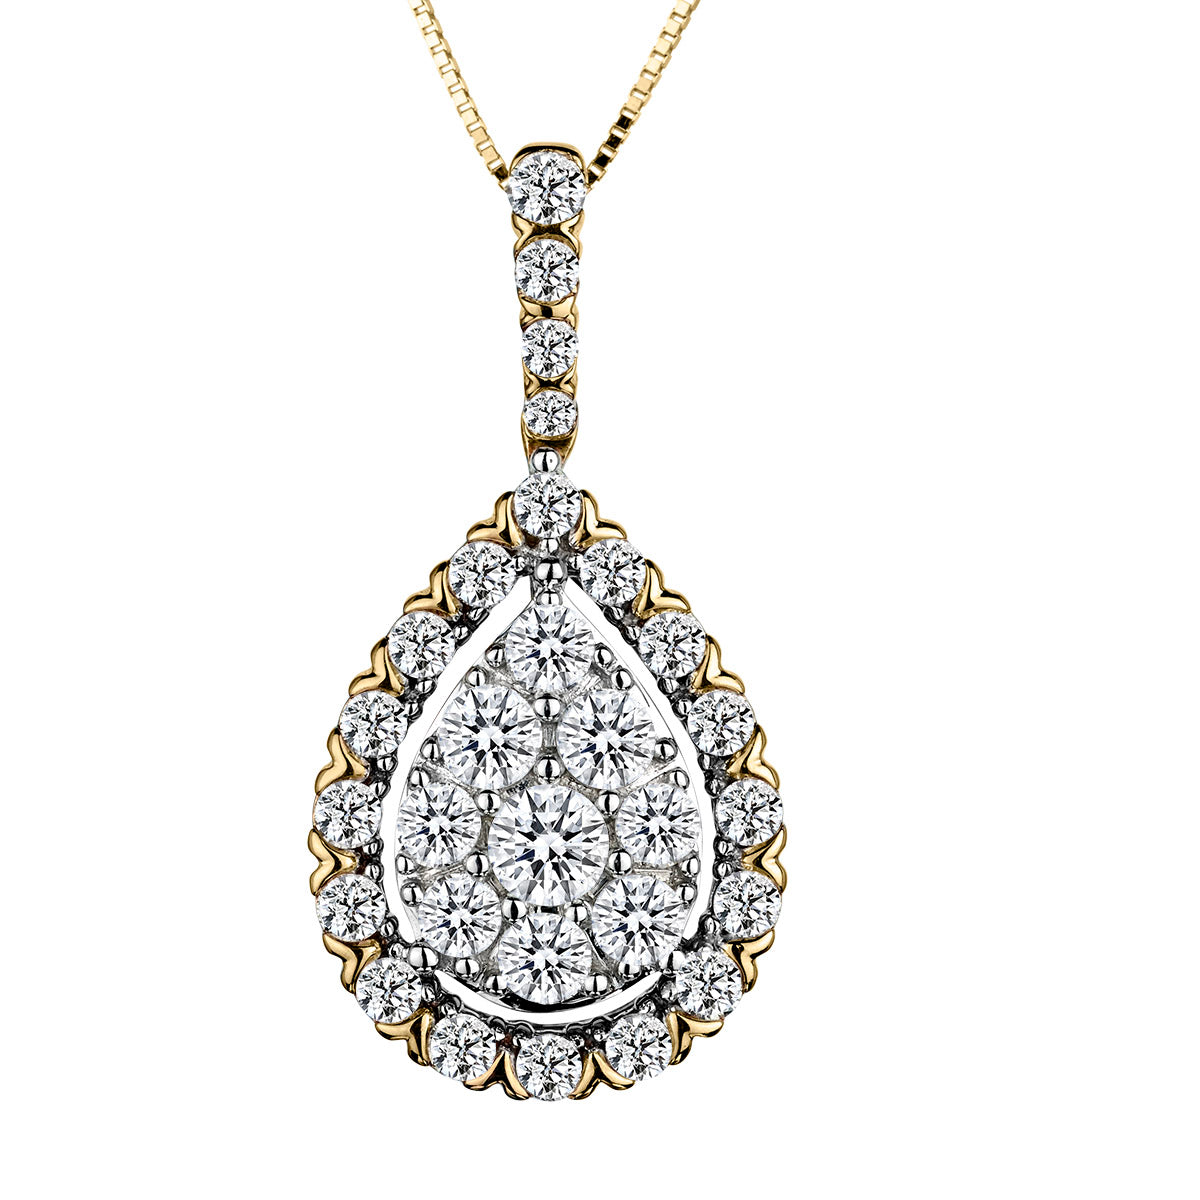 1.00 Carat Pear Shape Diamond Pendant,  14kt Two Tone (White Gold & Yellow Gold). Necklaces and Pendants. Griffin Jewellery Designs. 